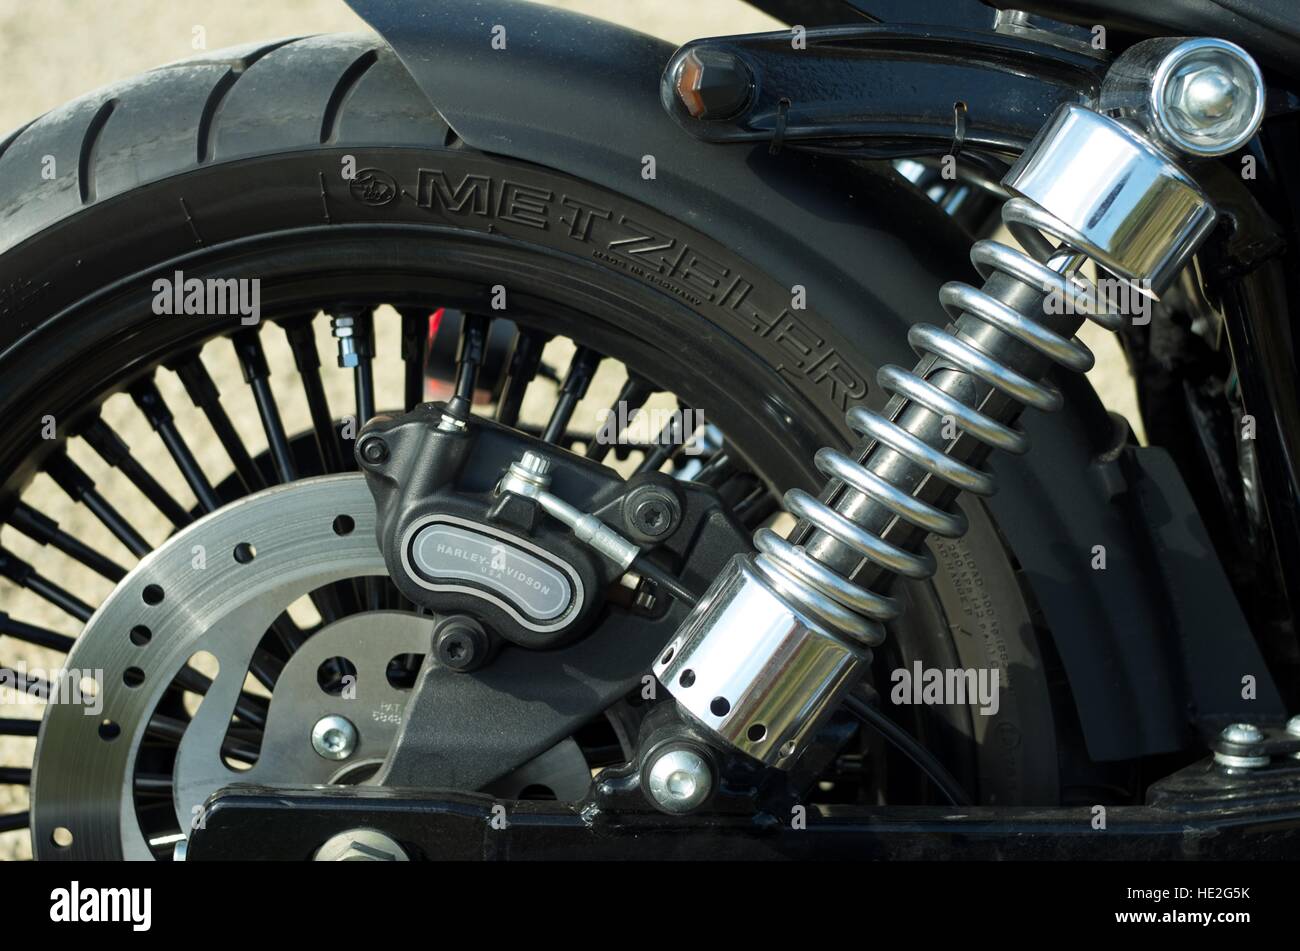 Rear shock absorber of a Harley Davidson motorcycle Stock Photo